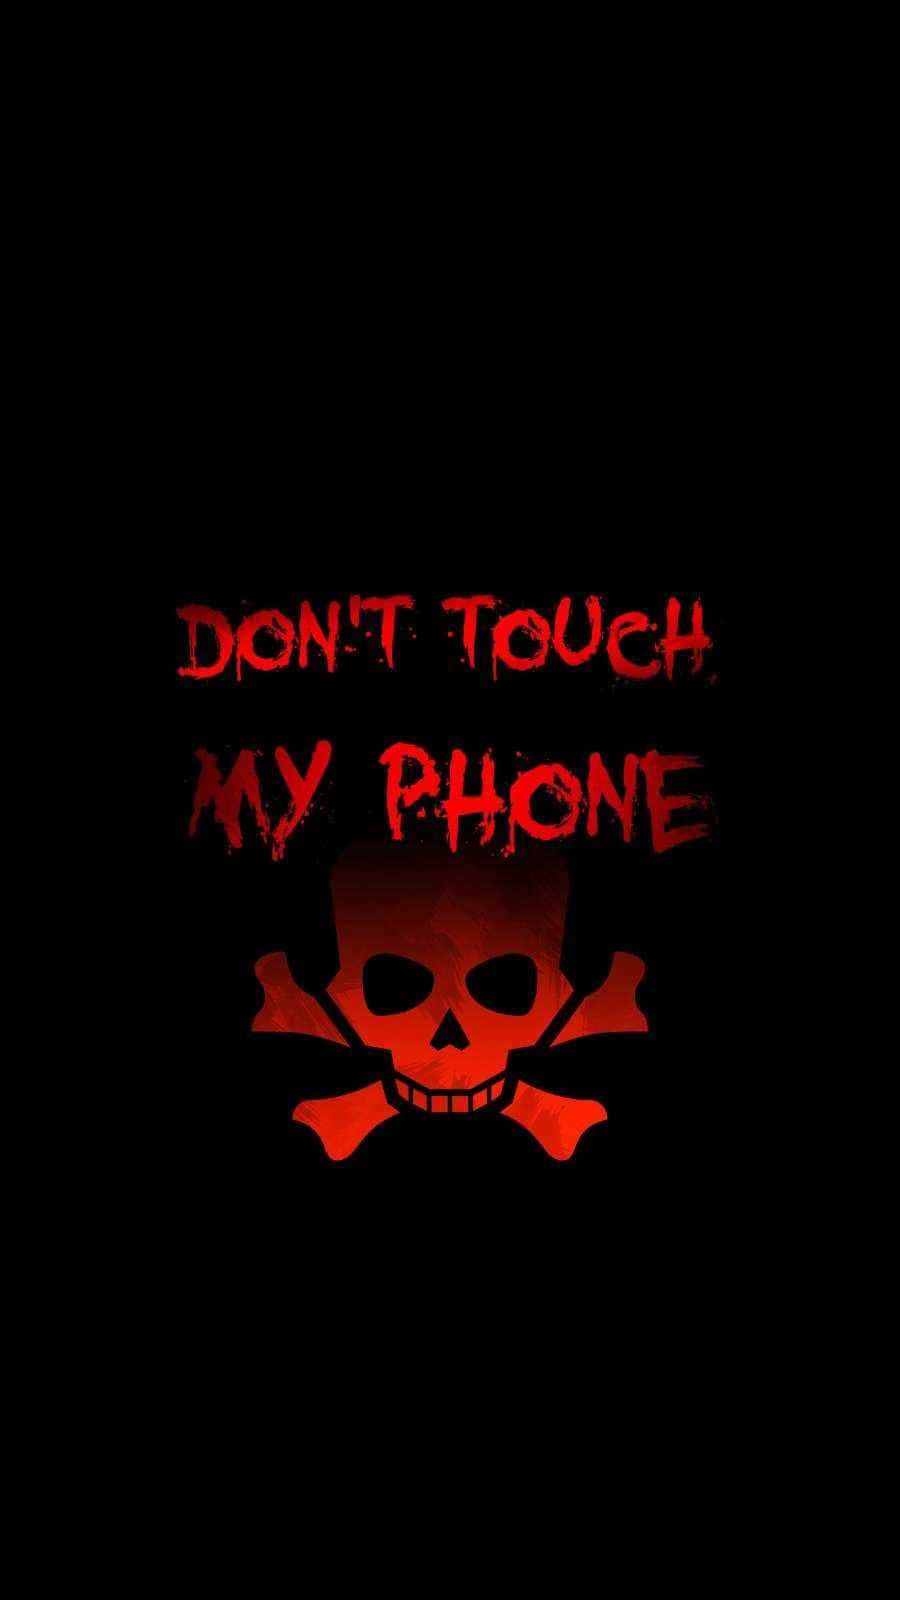 Keep your hands off my phone! Wallpaper